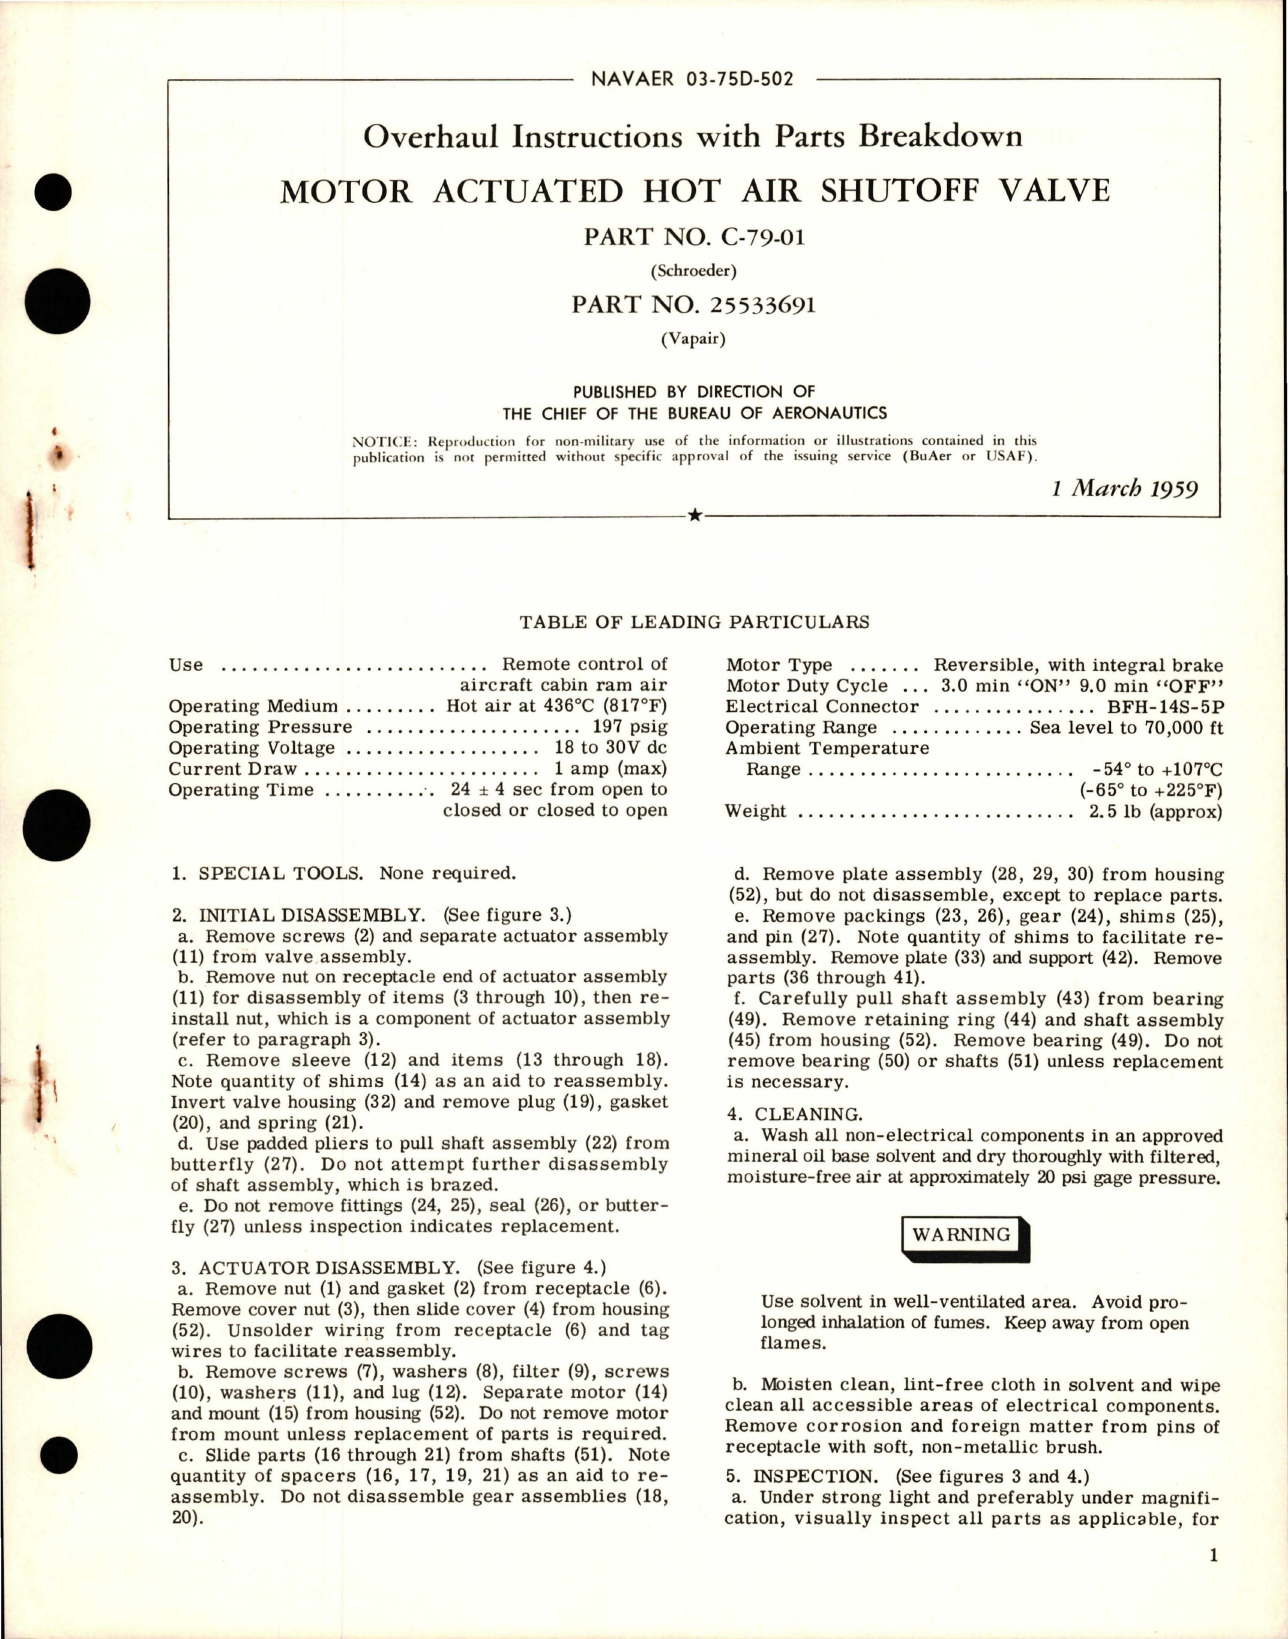 Sample page 1 from AirCorps Library document: Overhaul Instructions with Parts Breakdown for Motor Actuated Hot Air Shutoff Valve - Part C-79-01 and 25533691